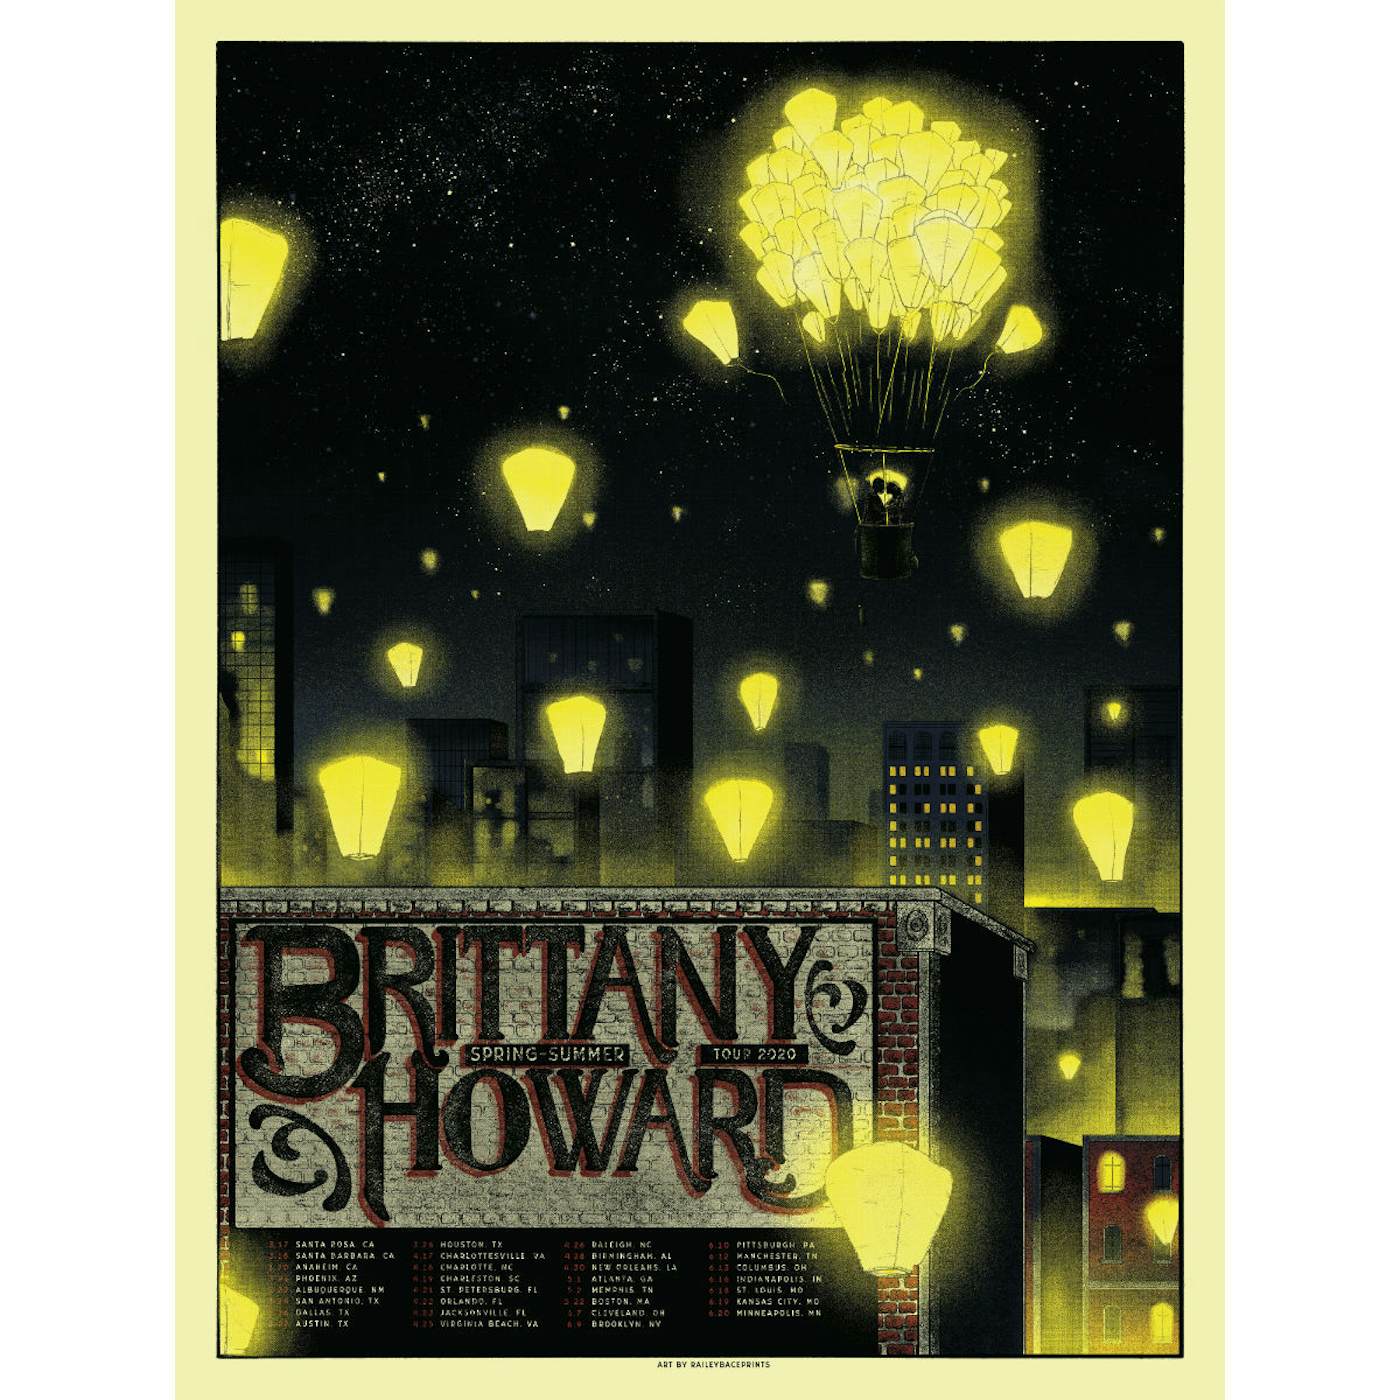 Brittany Howard Spring 2020 Tour Poster